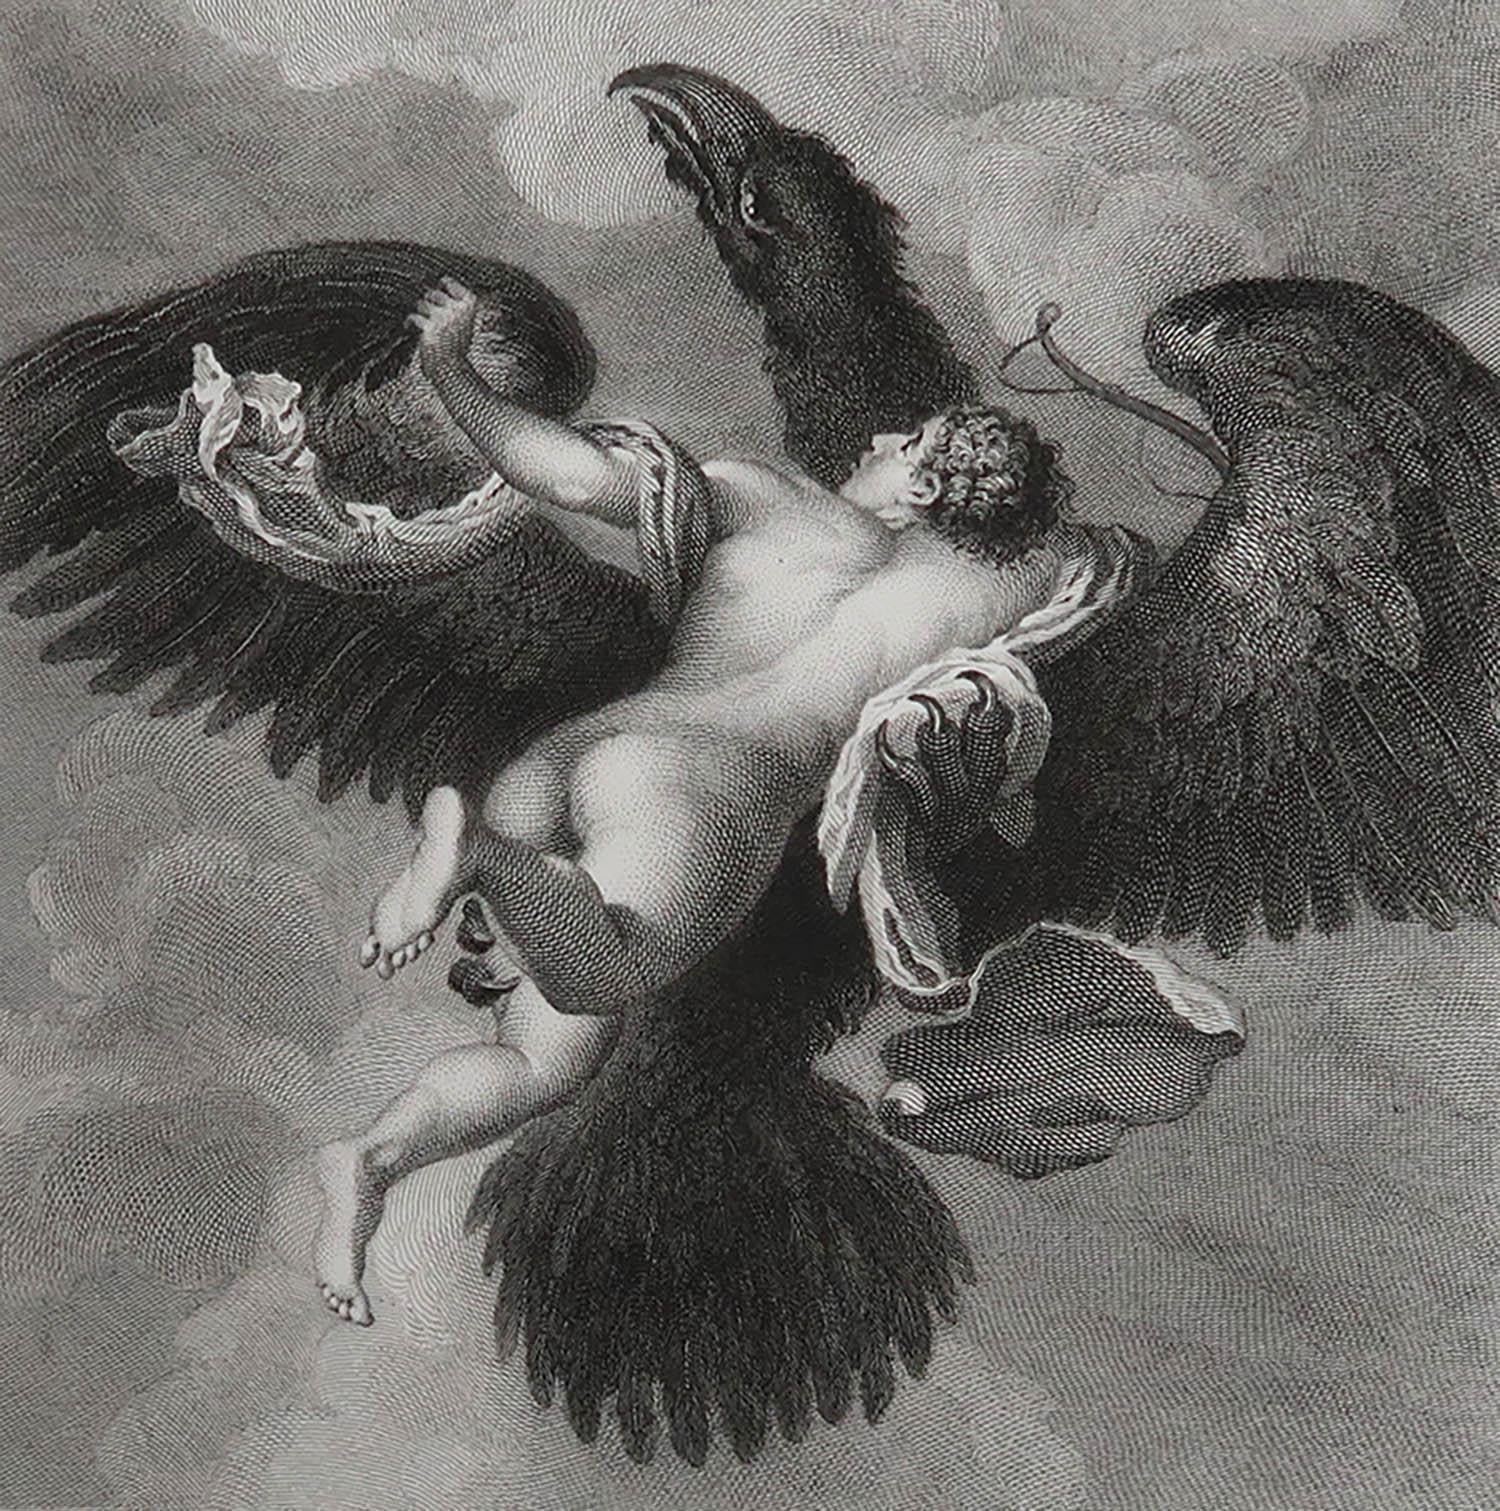 Wonderful image after Titian

Fine Steel engraving. 

Published by Jones & Co, London, circa 1850

Unframed.

